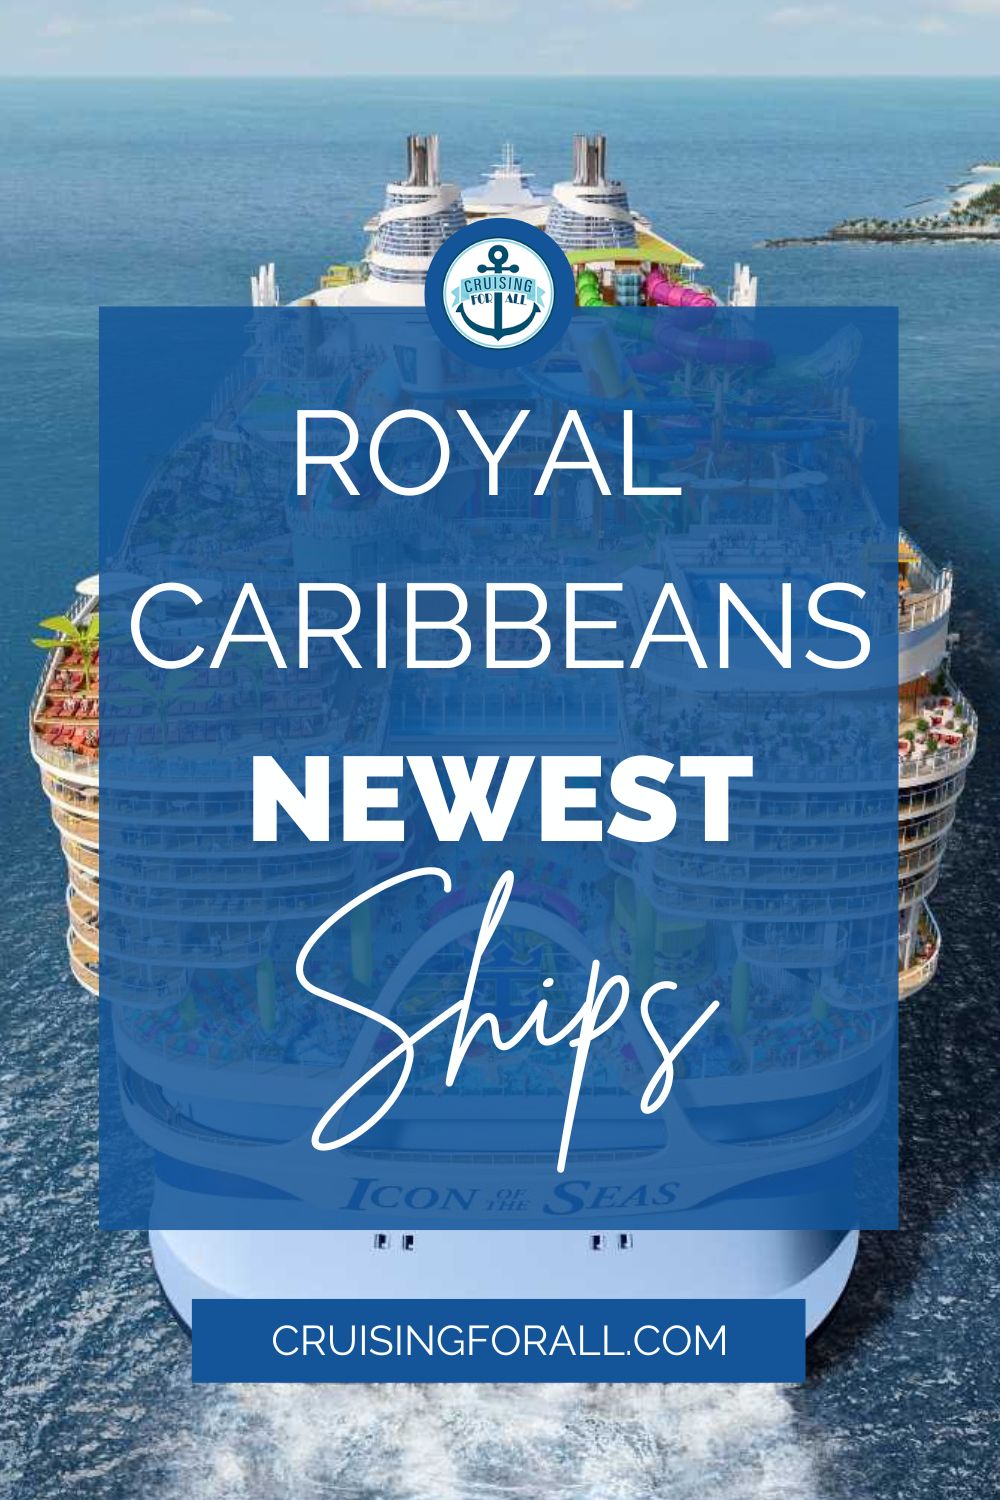 What are Royal Caribbeans Newest Ships